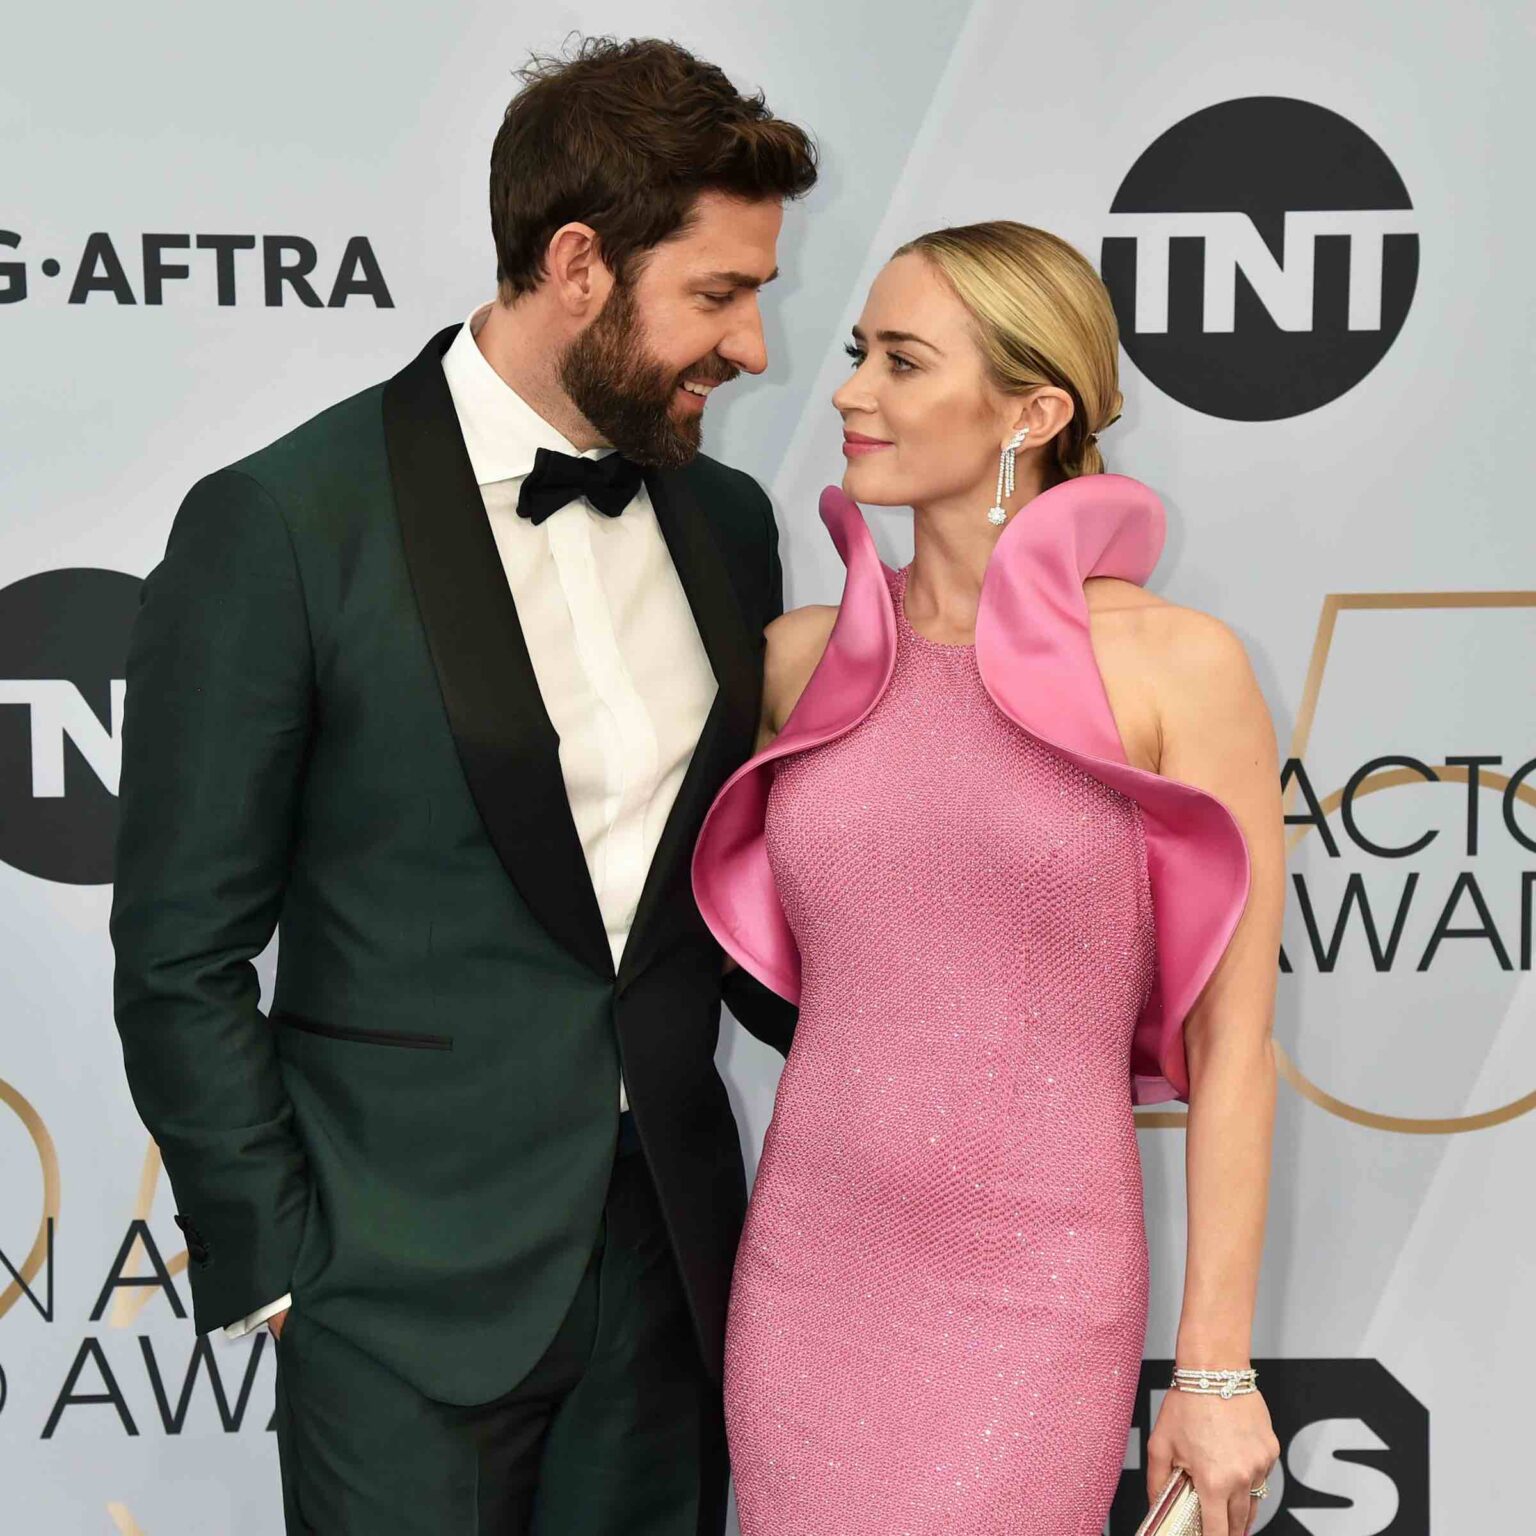 Emily Blunt and John Krasinski are one of Hollywood's most beloved couples. Take a stroll through their story and see why they are relationship goals.